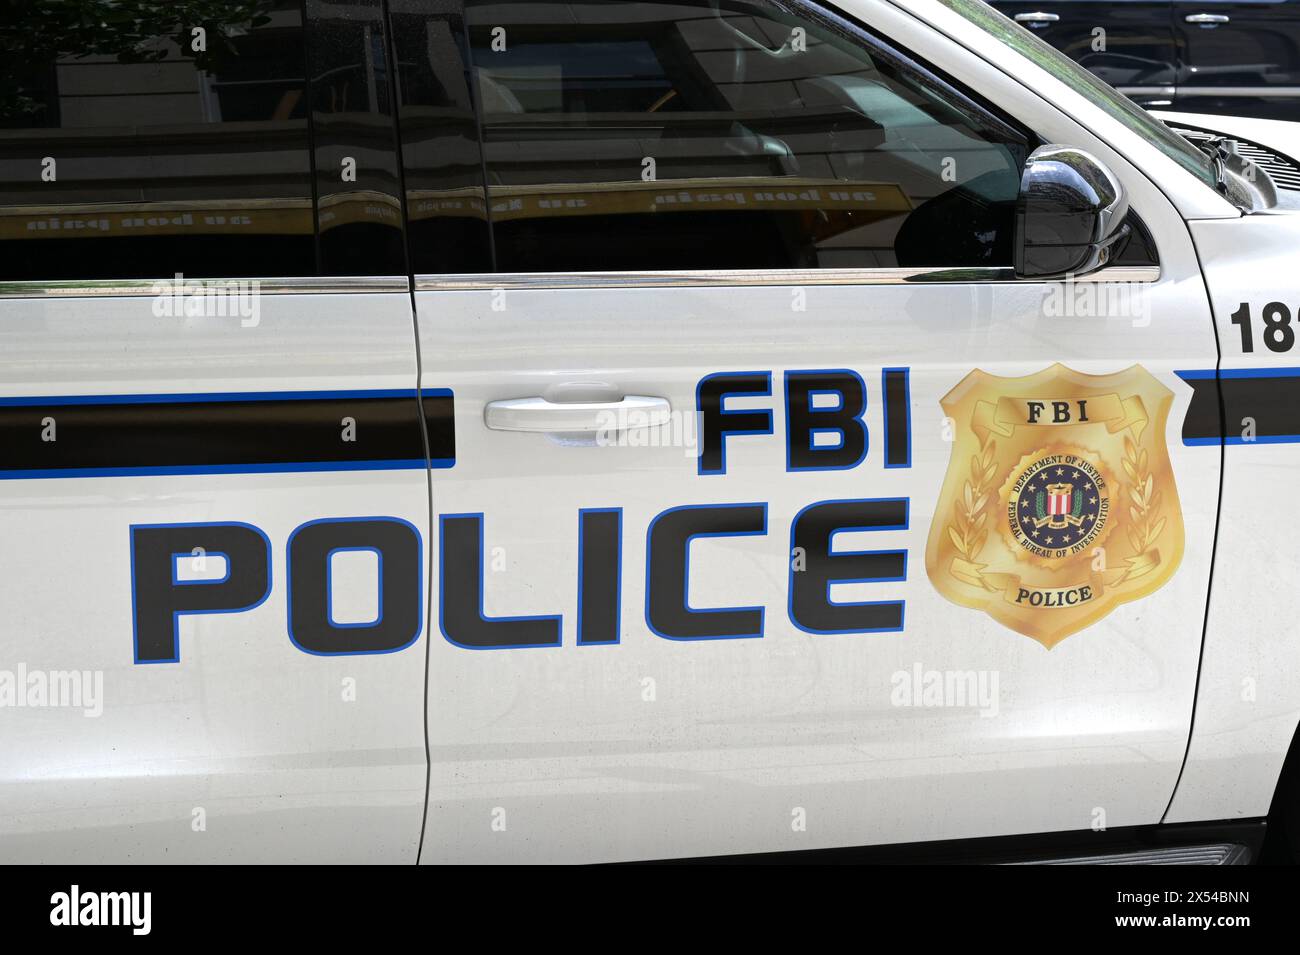 Washington DC, USA - 30 April 2024: Close up view of the badge on the side of a police patrol car used by the FBI. Stock Photo